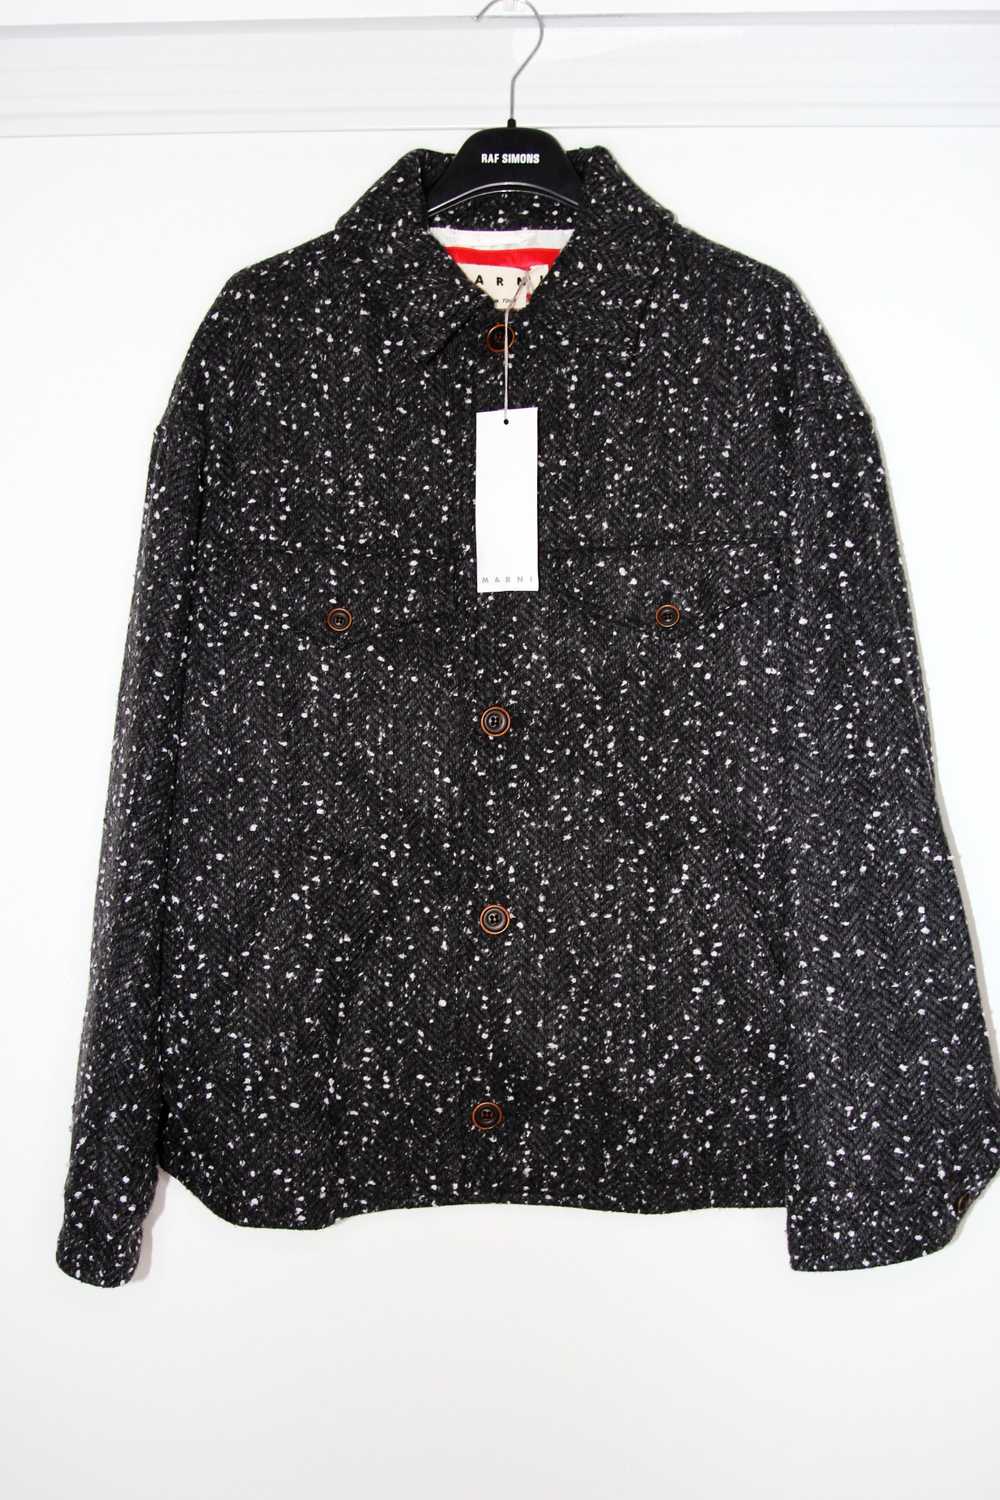 BNWT AW21 MARNI SPECKLED JACKET 46 - image 2